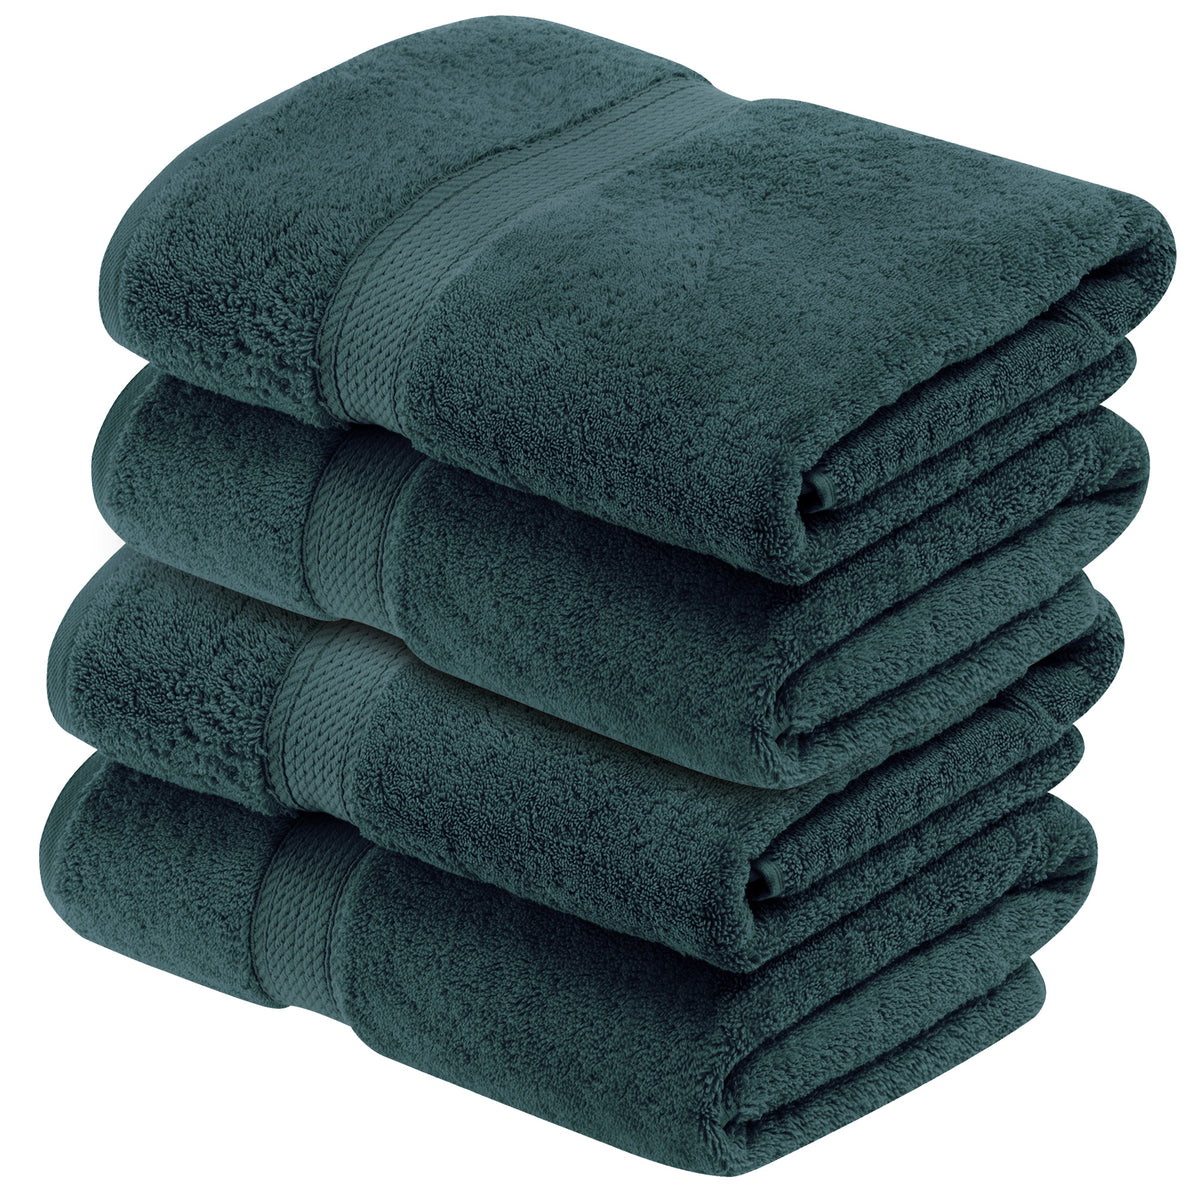 Sustainable Bamboo Bath Towel - Charcoal Gray - Made in Turkey